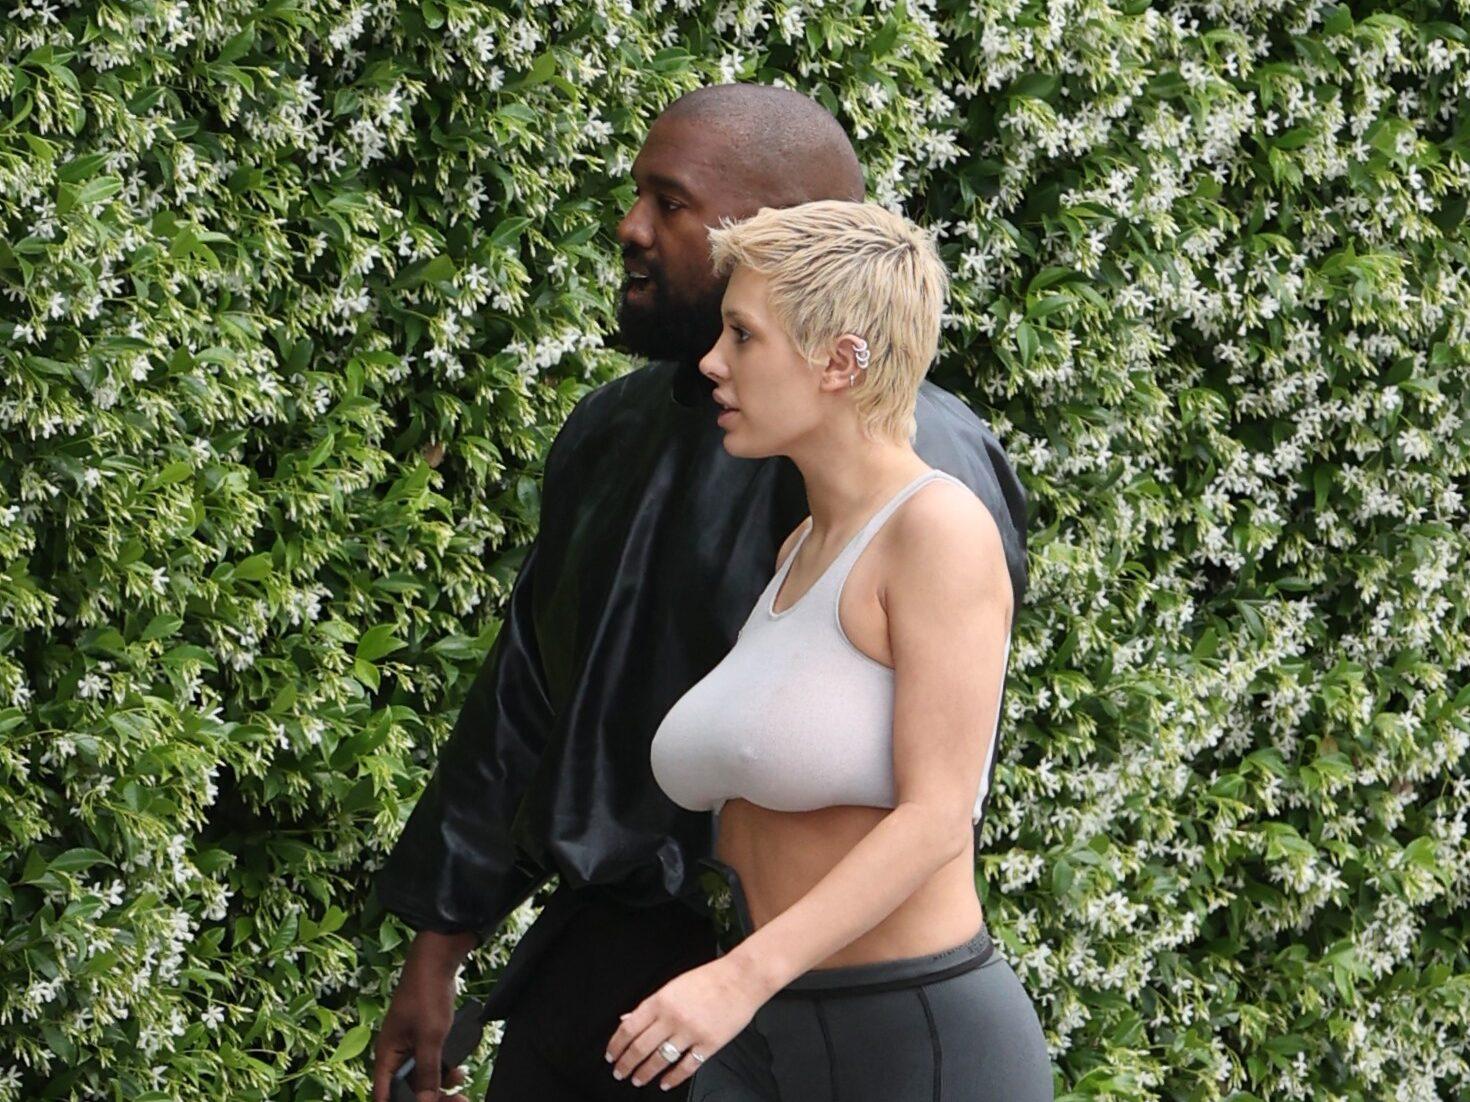 Kanye West and his wife Bianca Censori